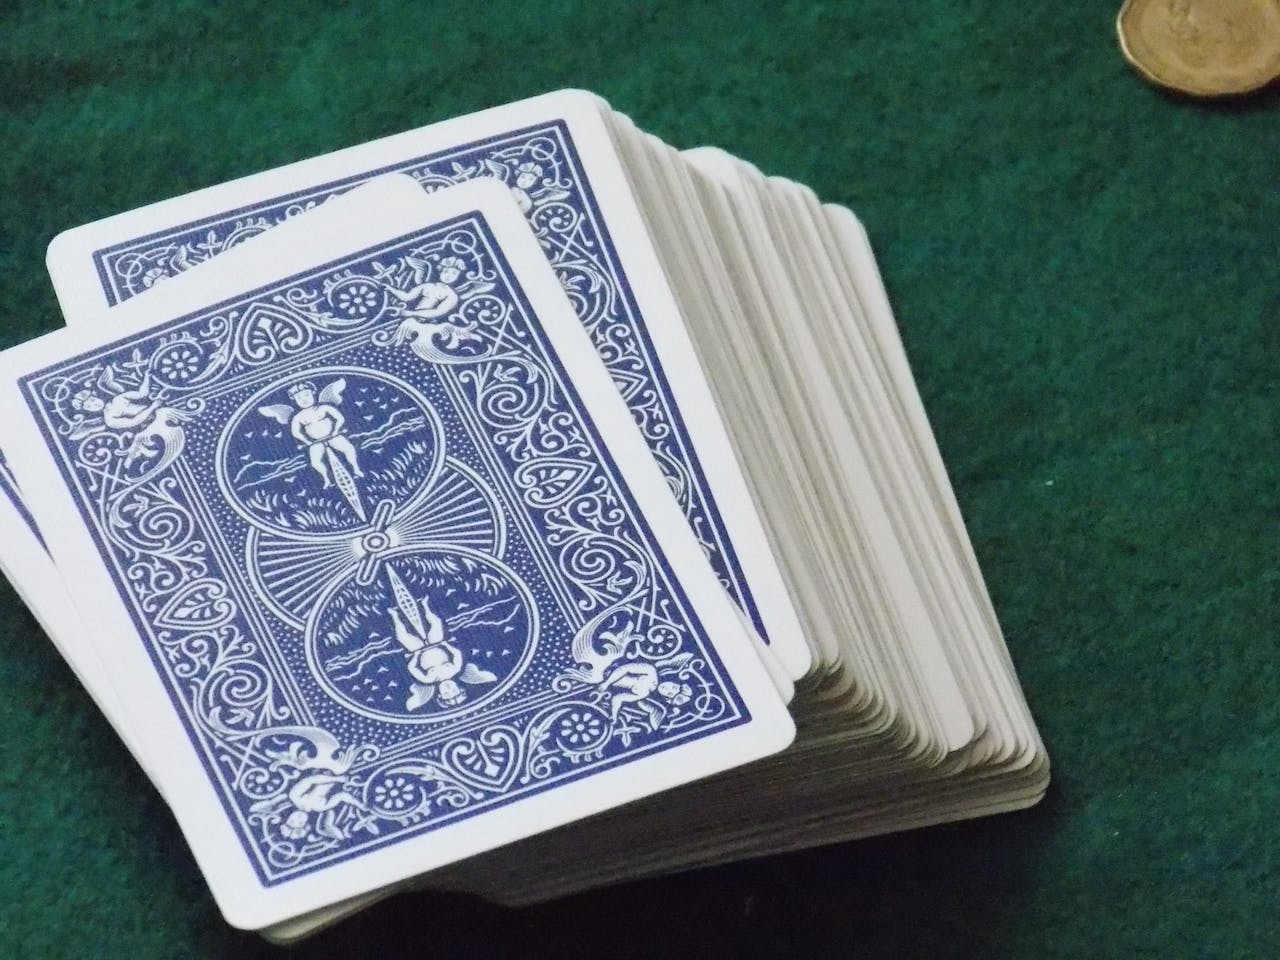 A deck of card on a table